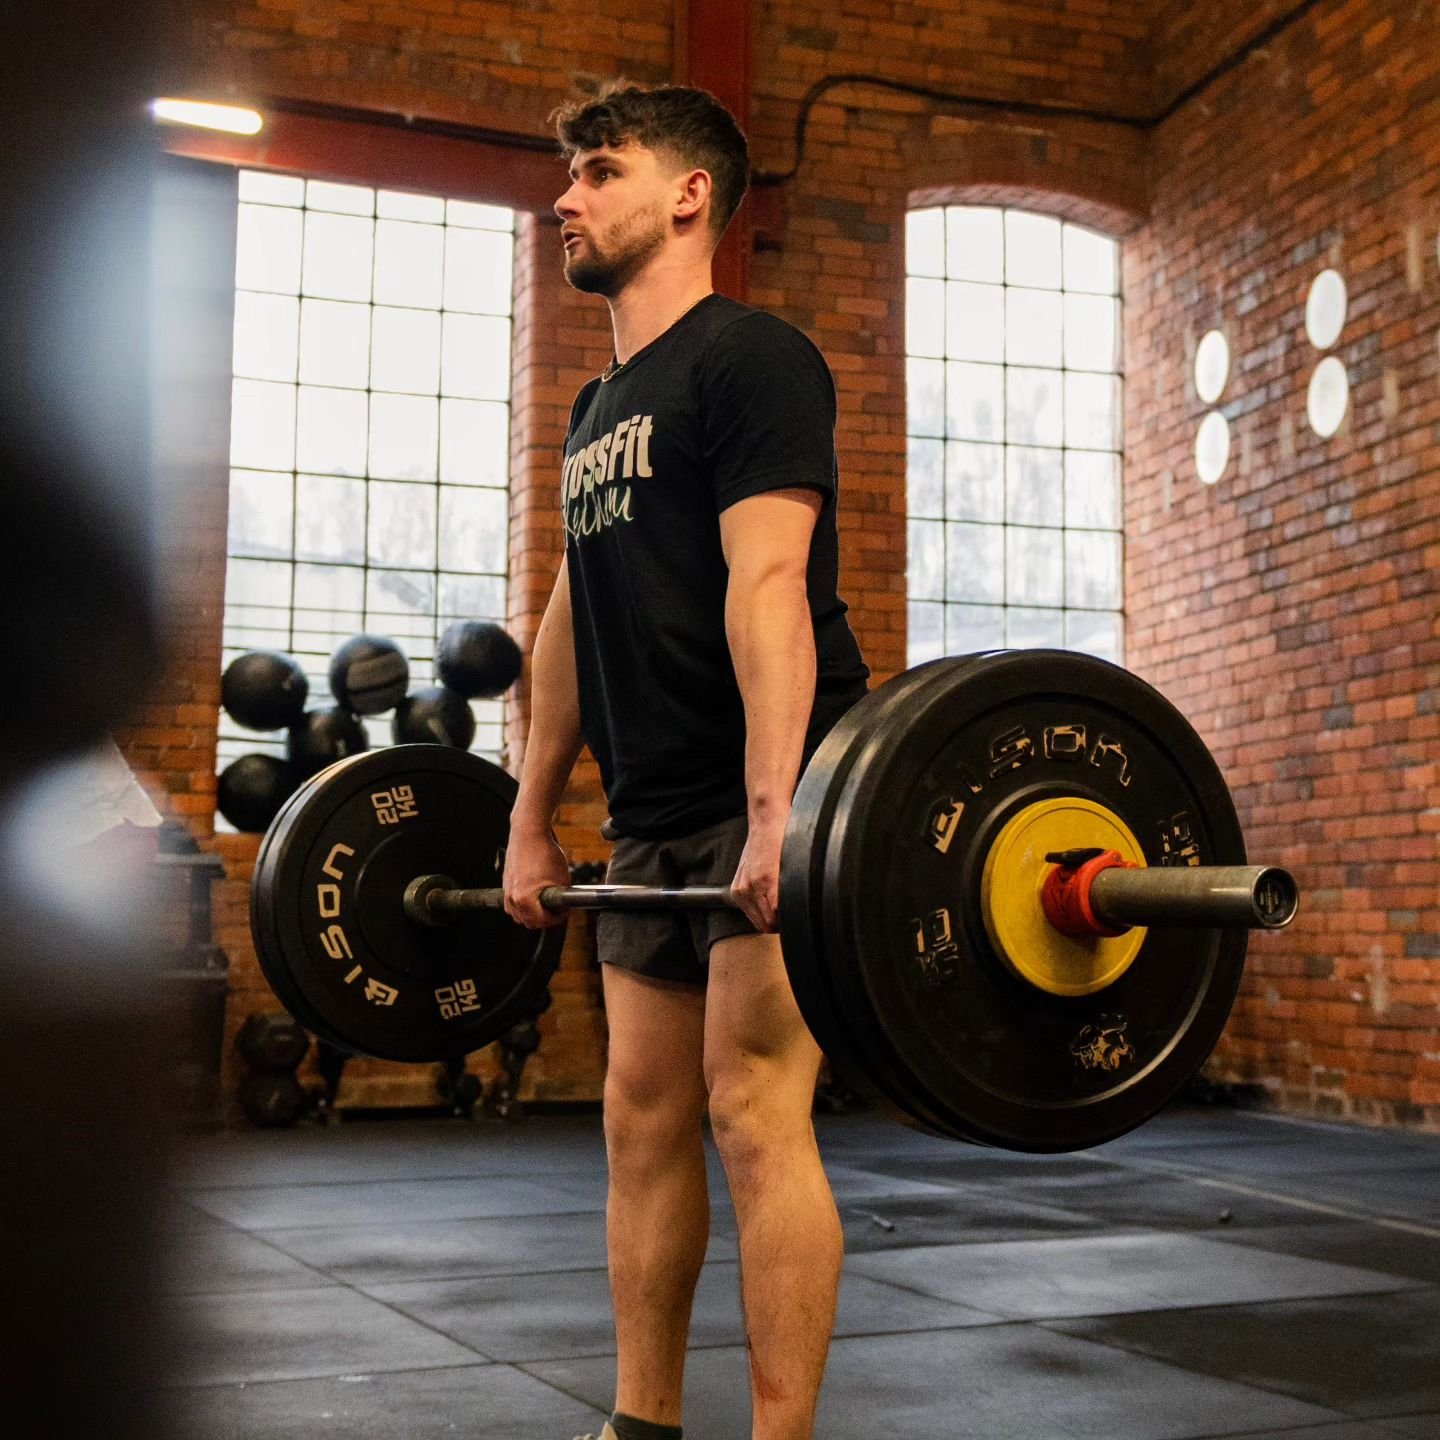 Max out Week on the 27th ⚡️

We've got big things lined up for the end of the month as we test out our squats, deadlifts and bench presses on the last week of May. 

Well done to our members who have been posting about their PBs recently and we're ex